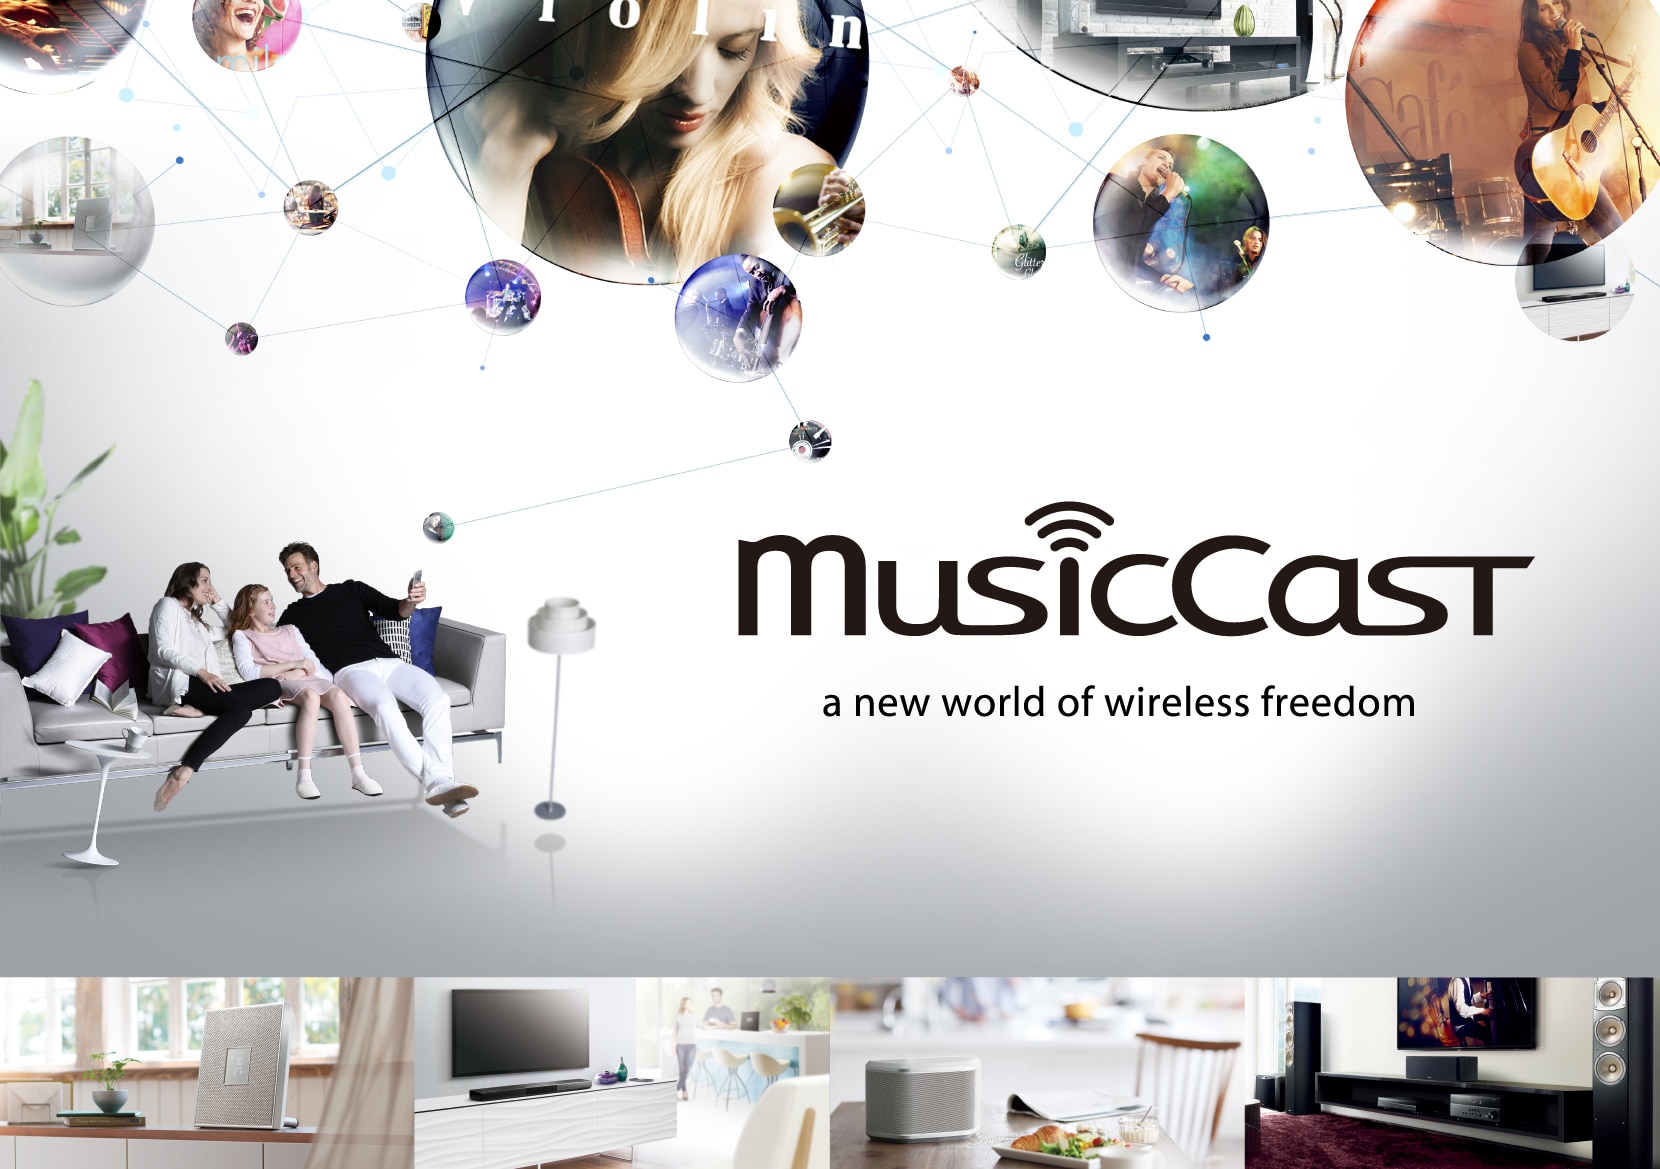 MusicCast - a new world of wireless freedom